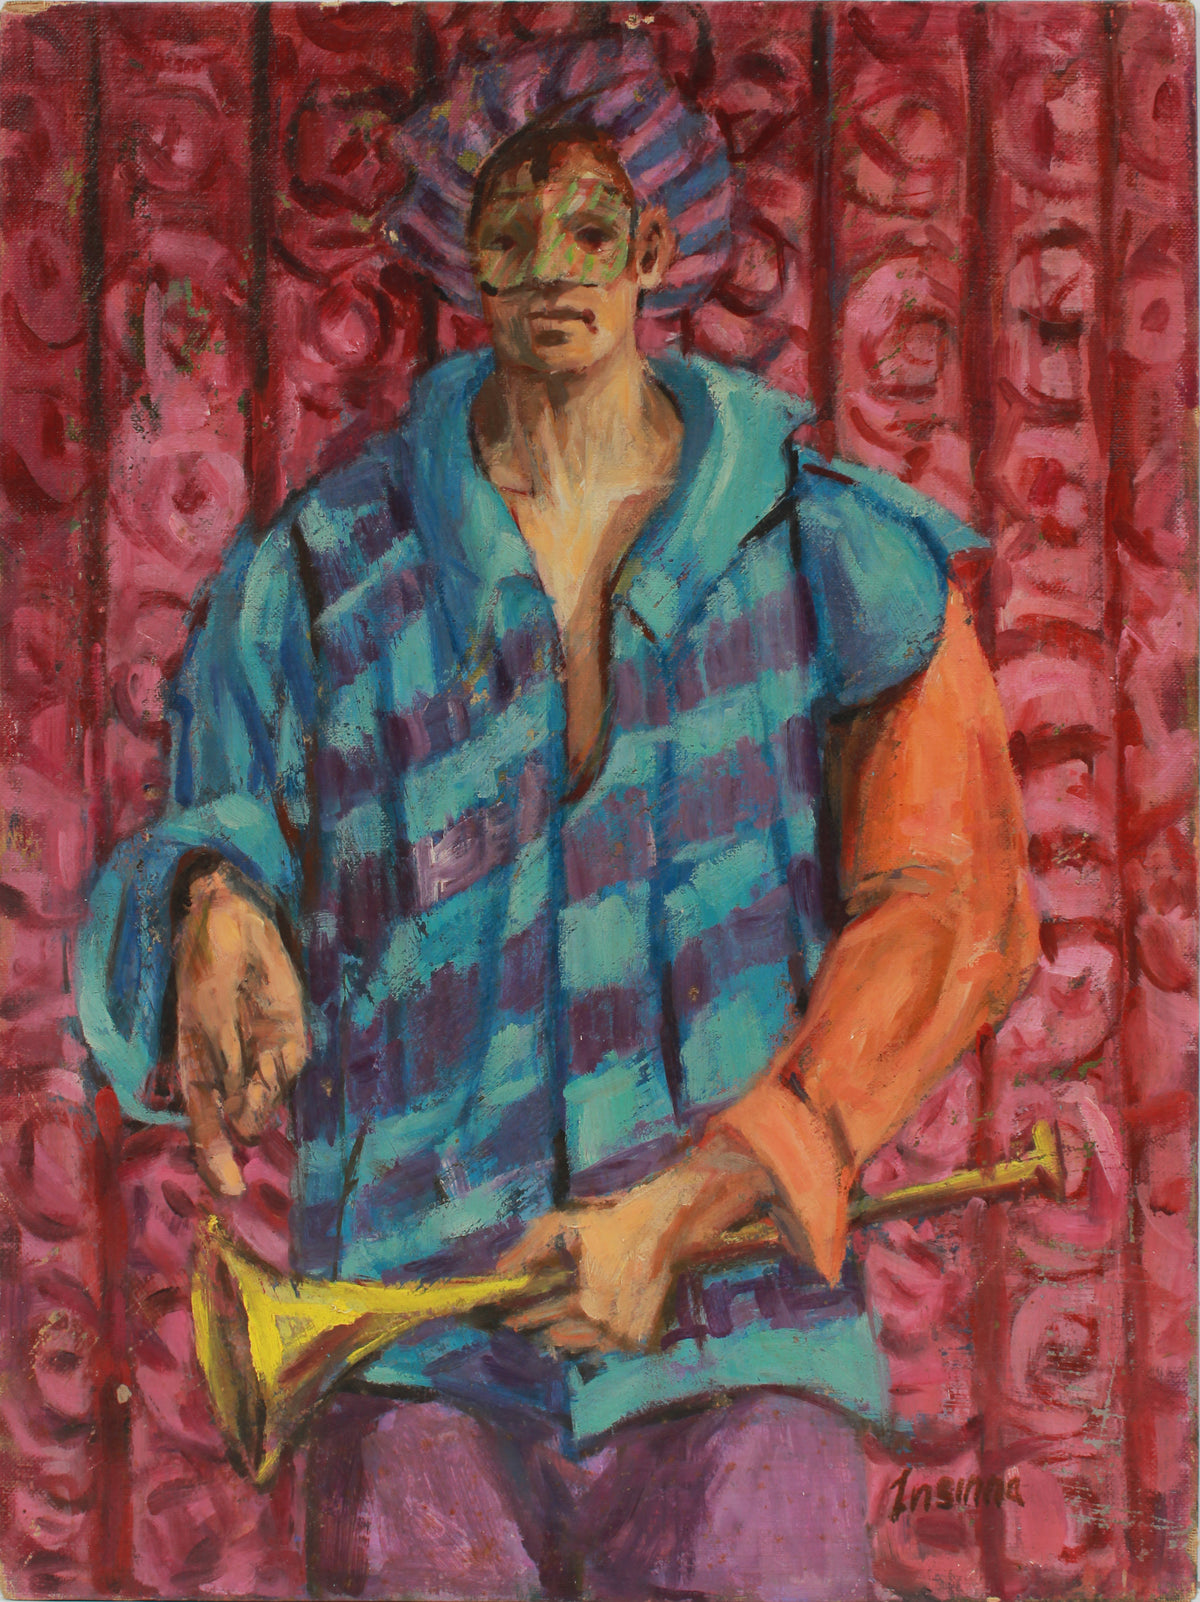 &lt;i&gt;Musician&lt;/i&gt; &lt;br&gt;1960s Oil &lt;br&gt;&lt;br&gt;#A9462